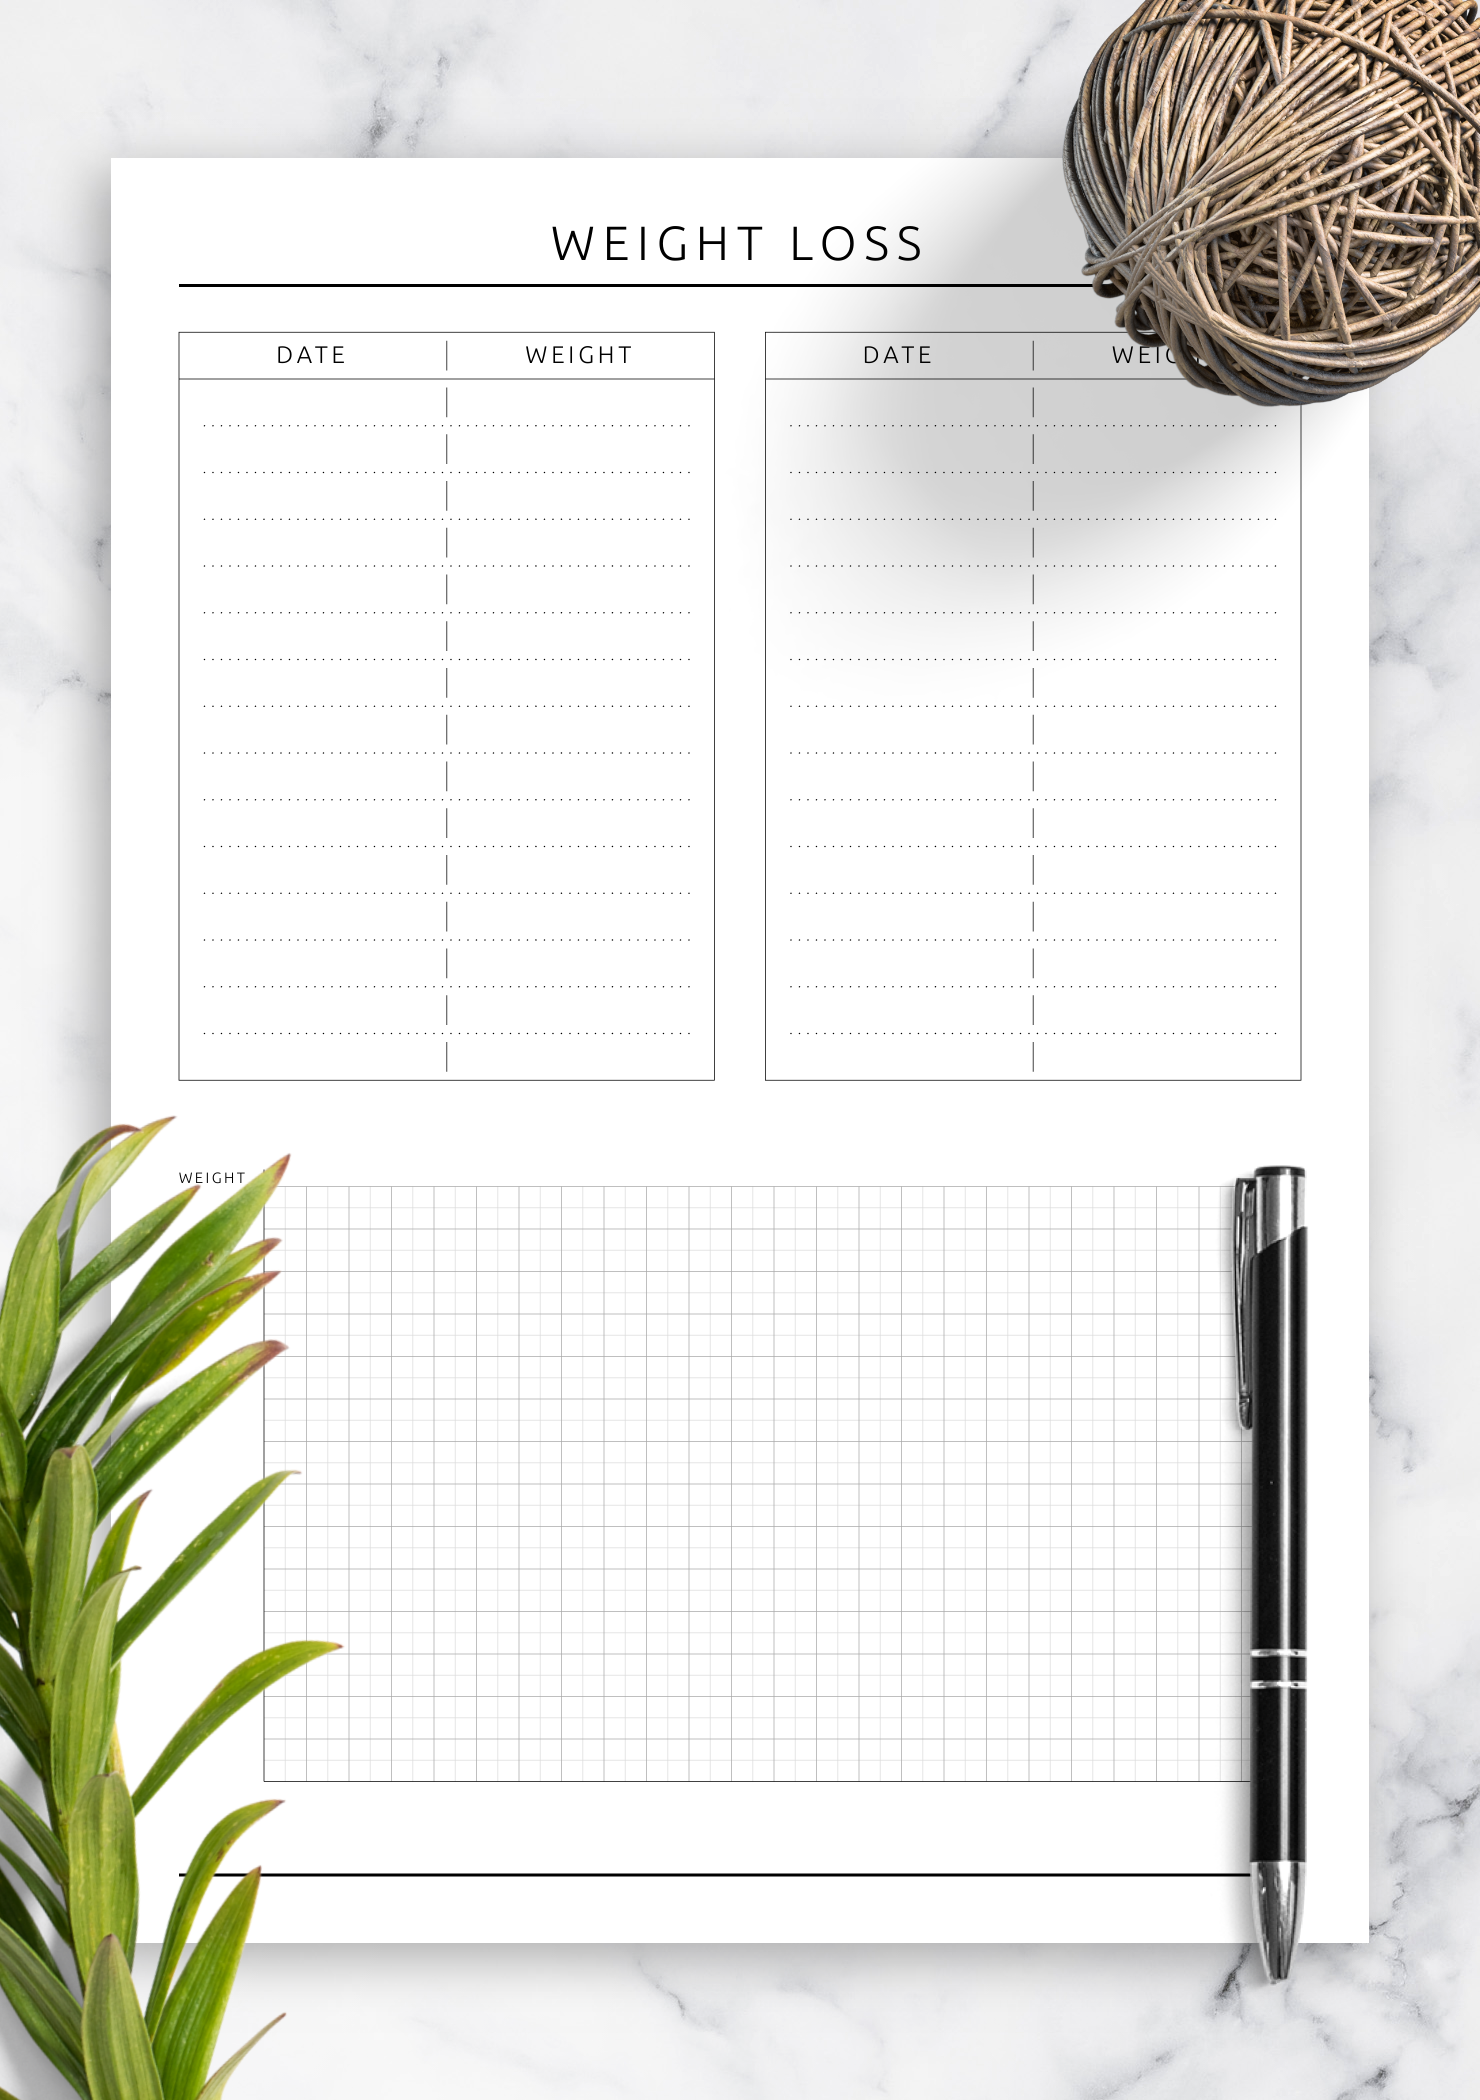 download-printable-weight-loss-tracker-template-pdf